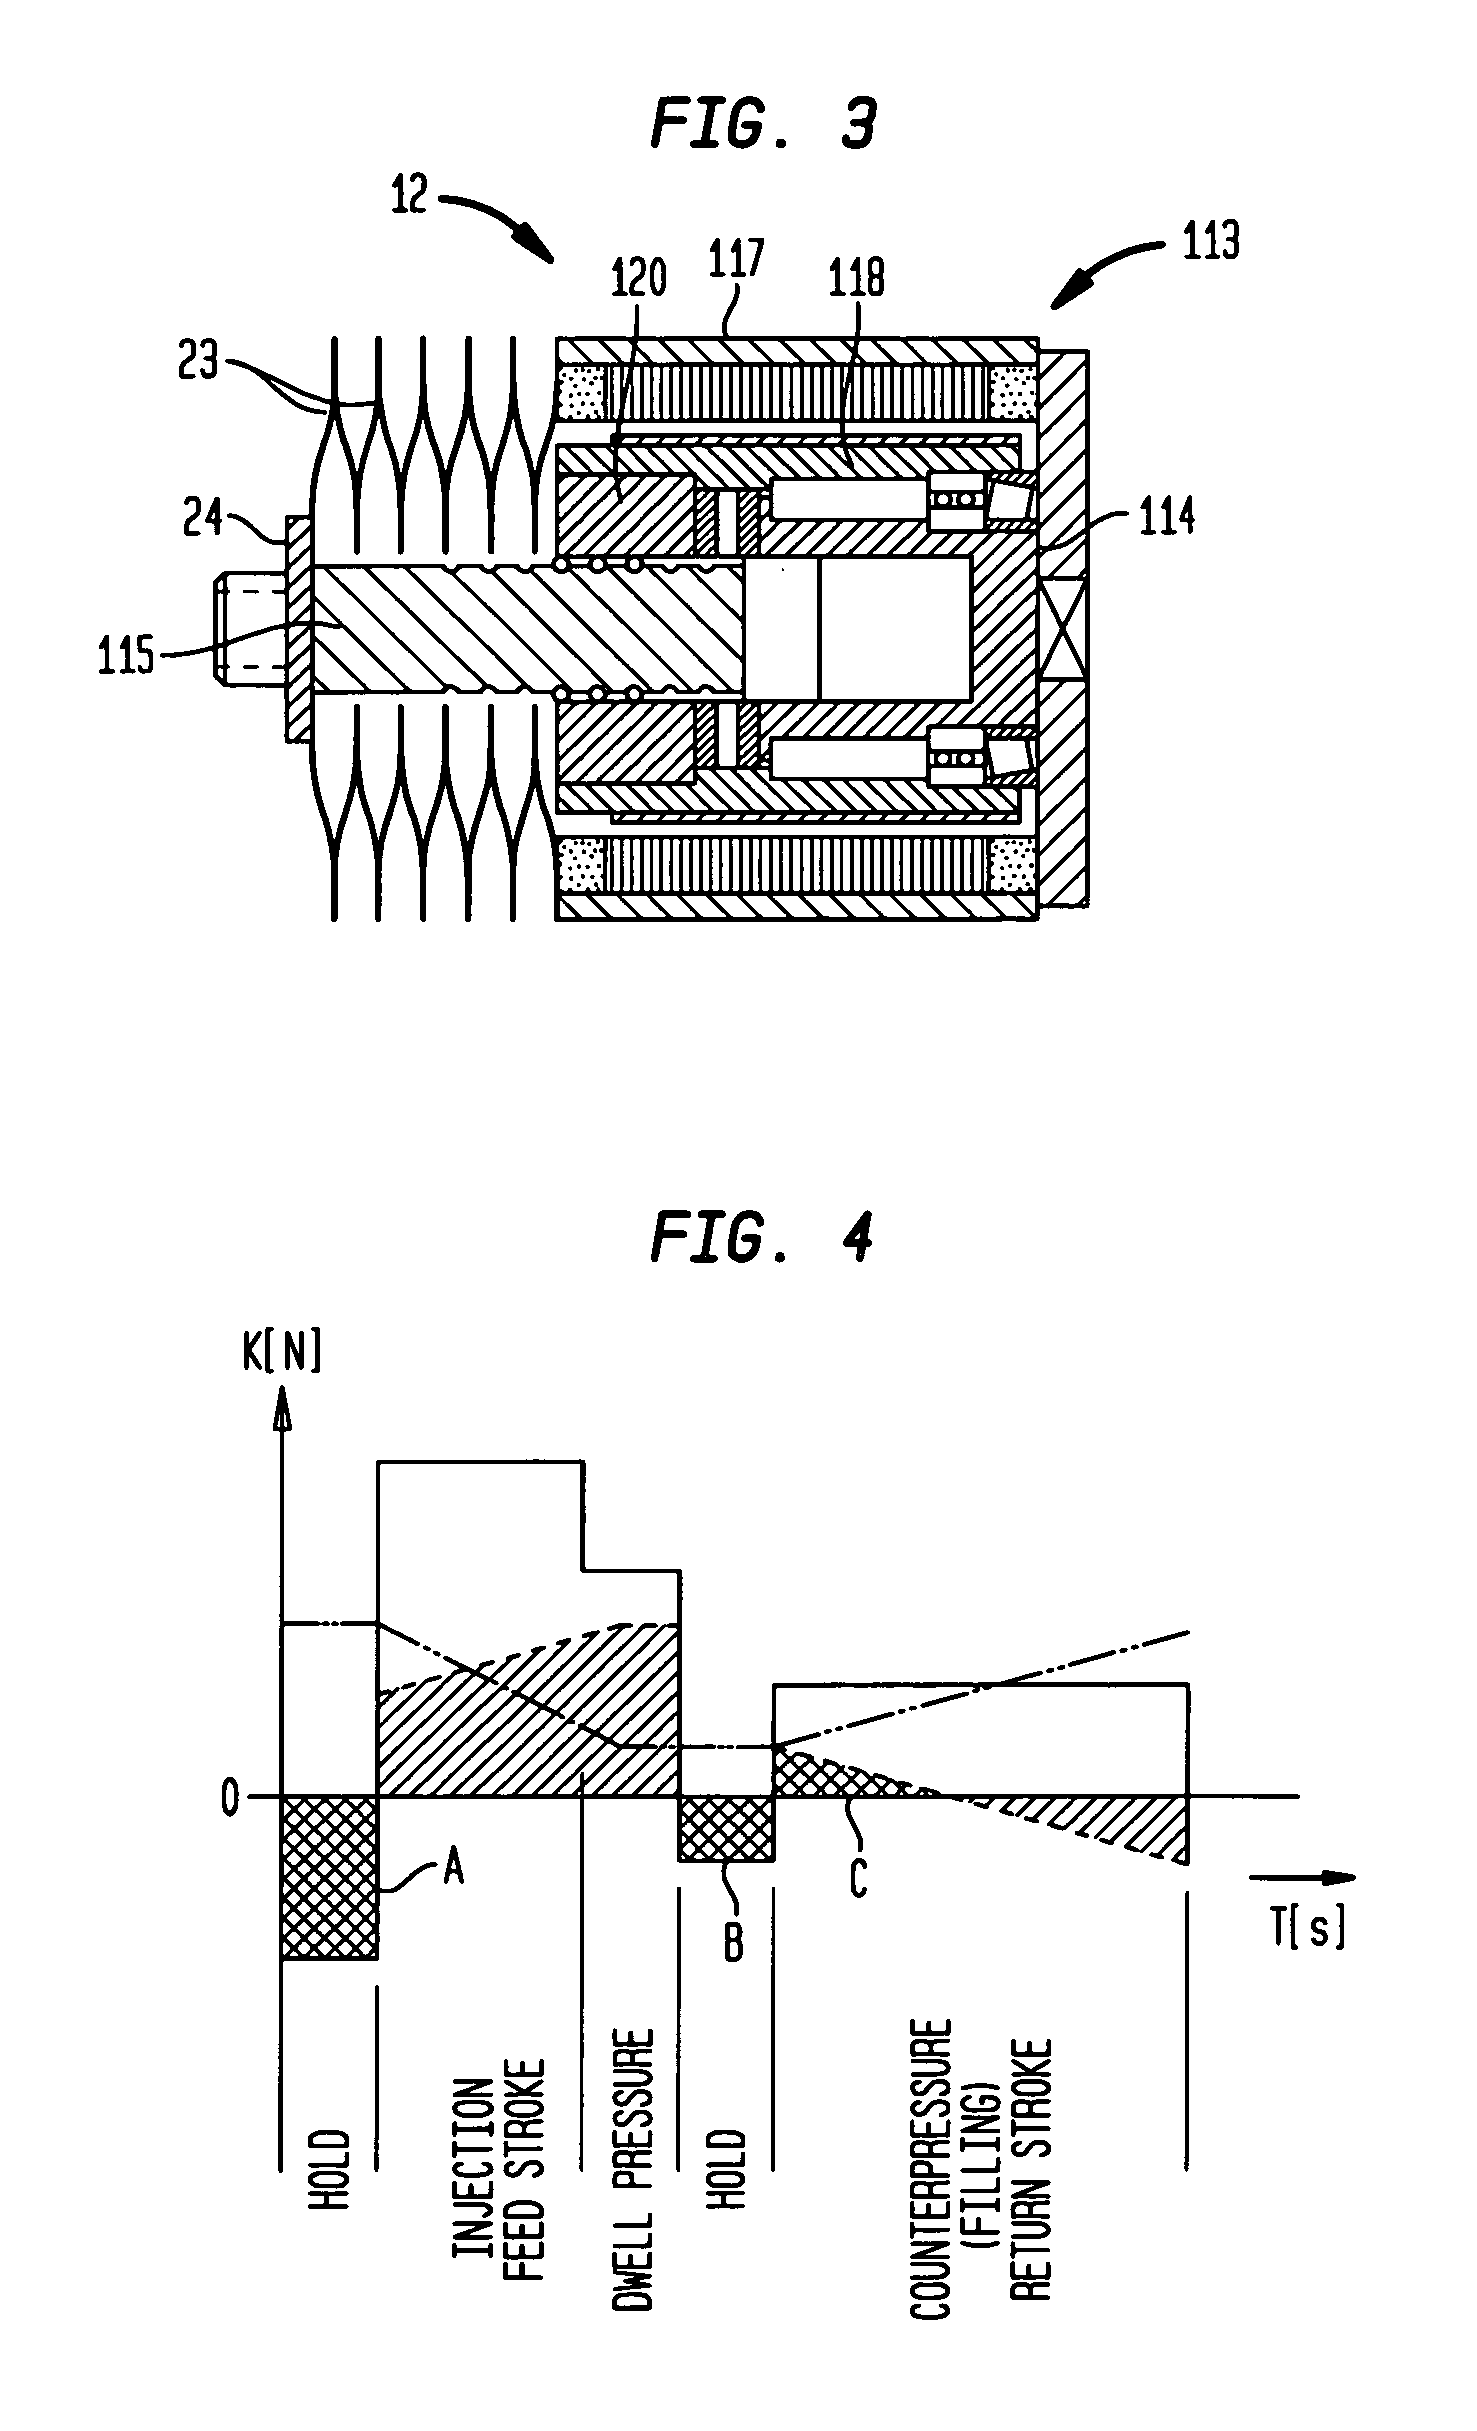 Plasticizing unit with an electromotive spindle drive for an injection molding machine